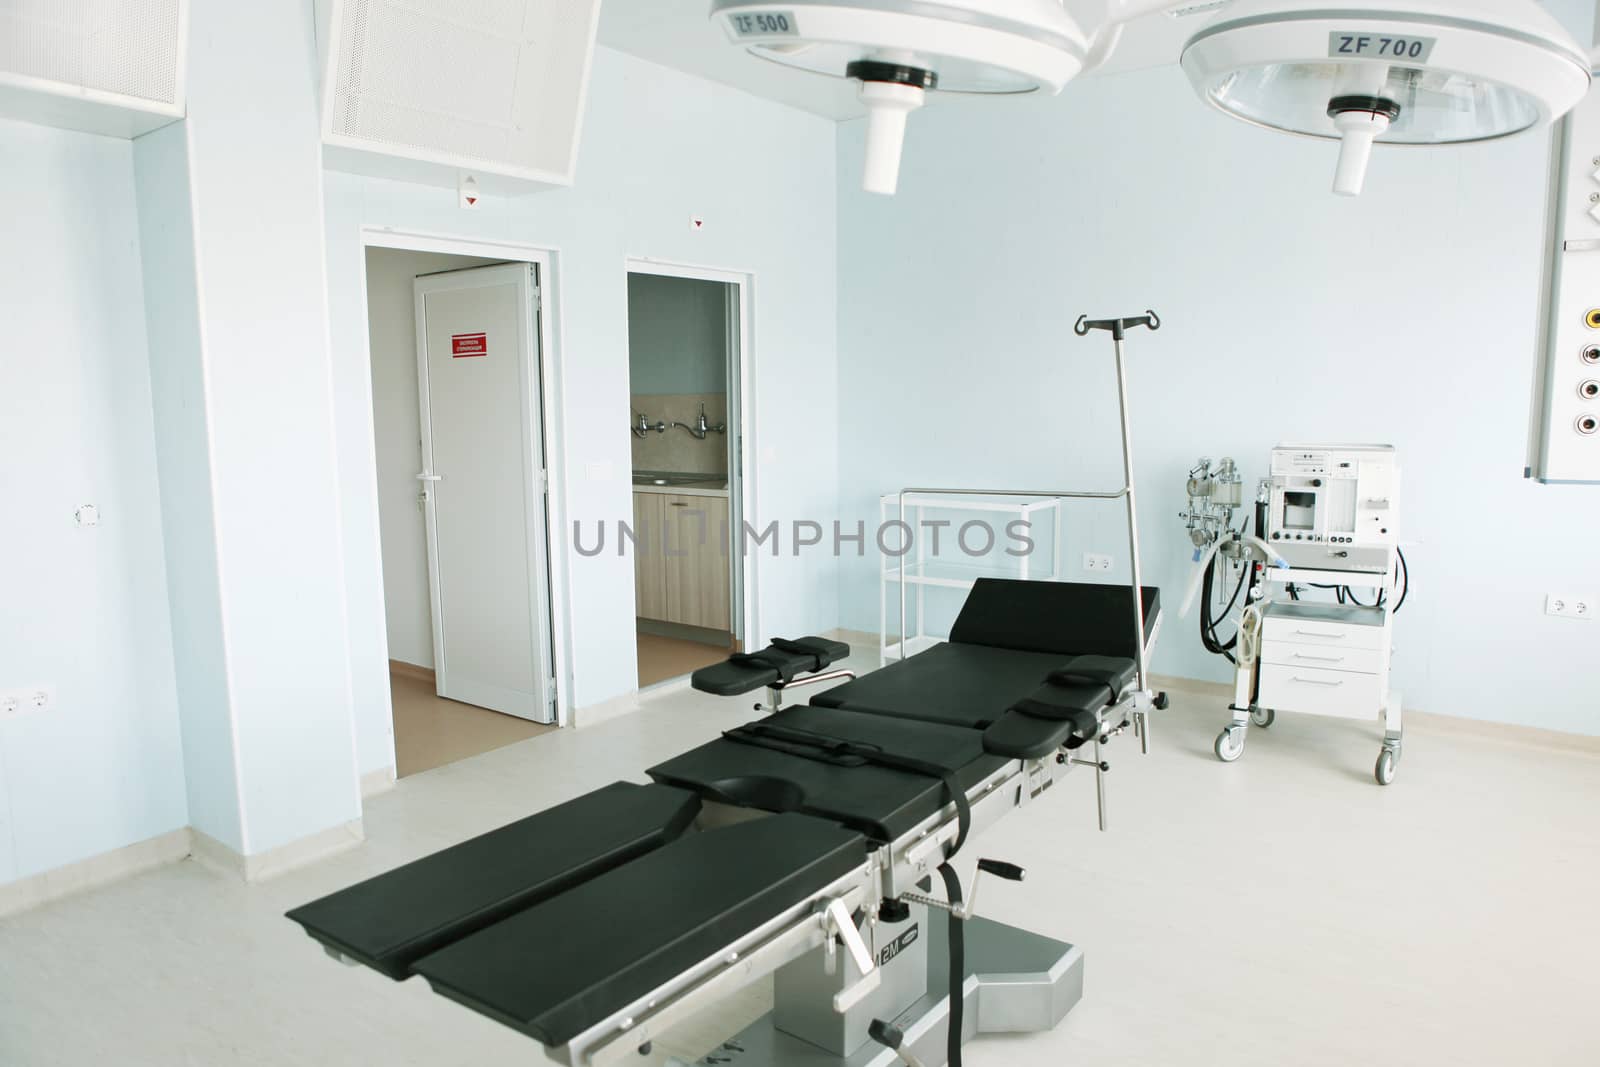 Operating room in a modern hospital by nenovbrothers